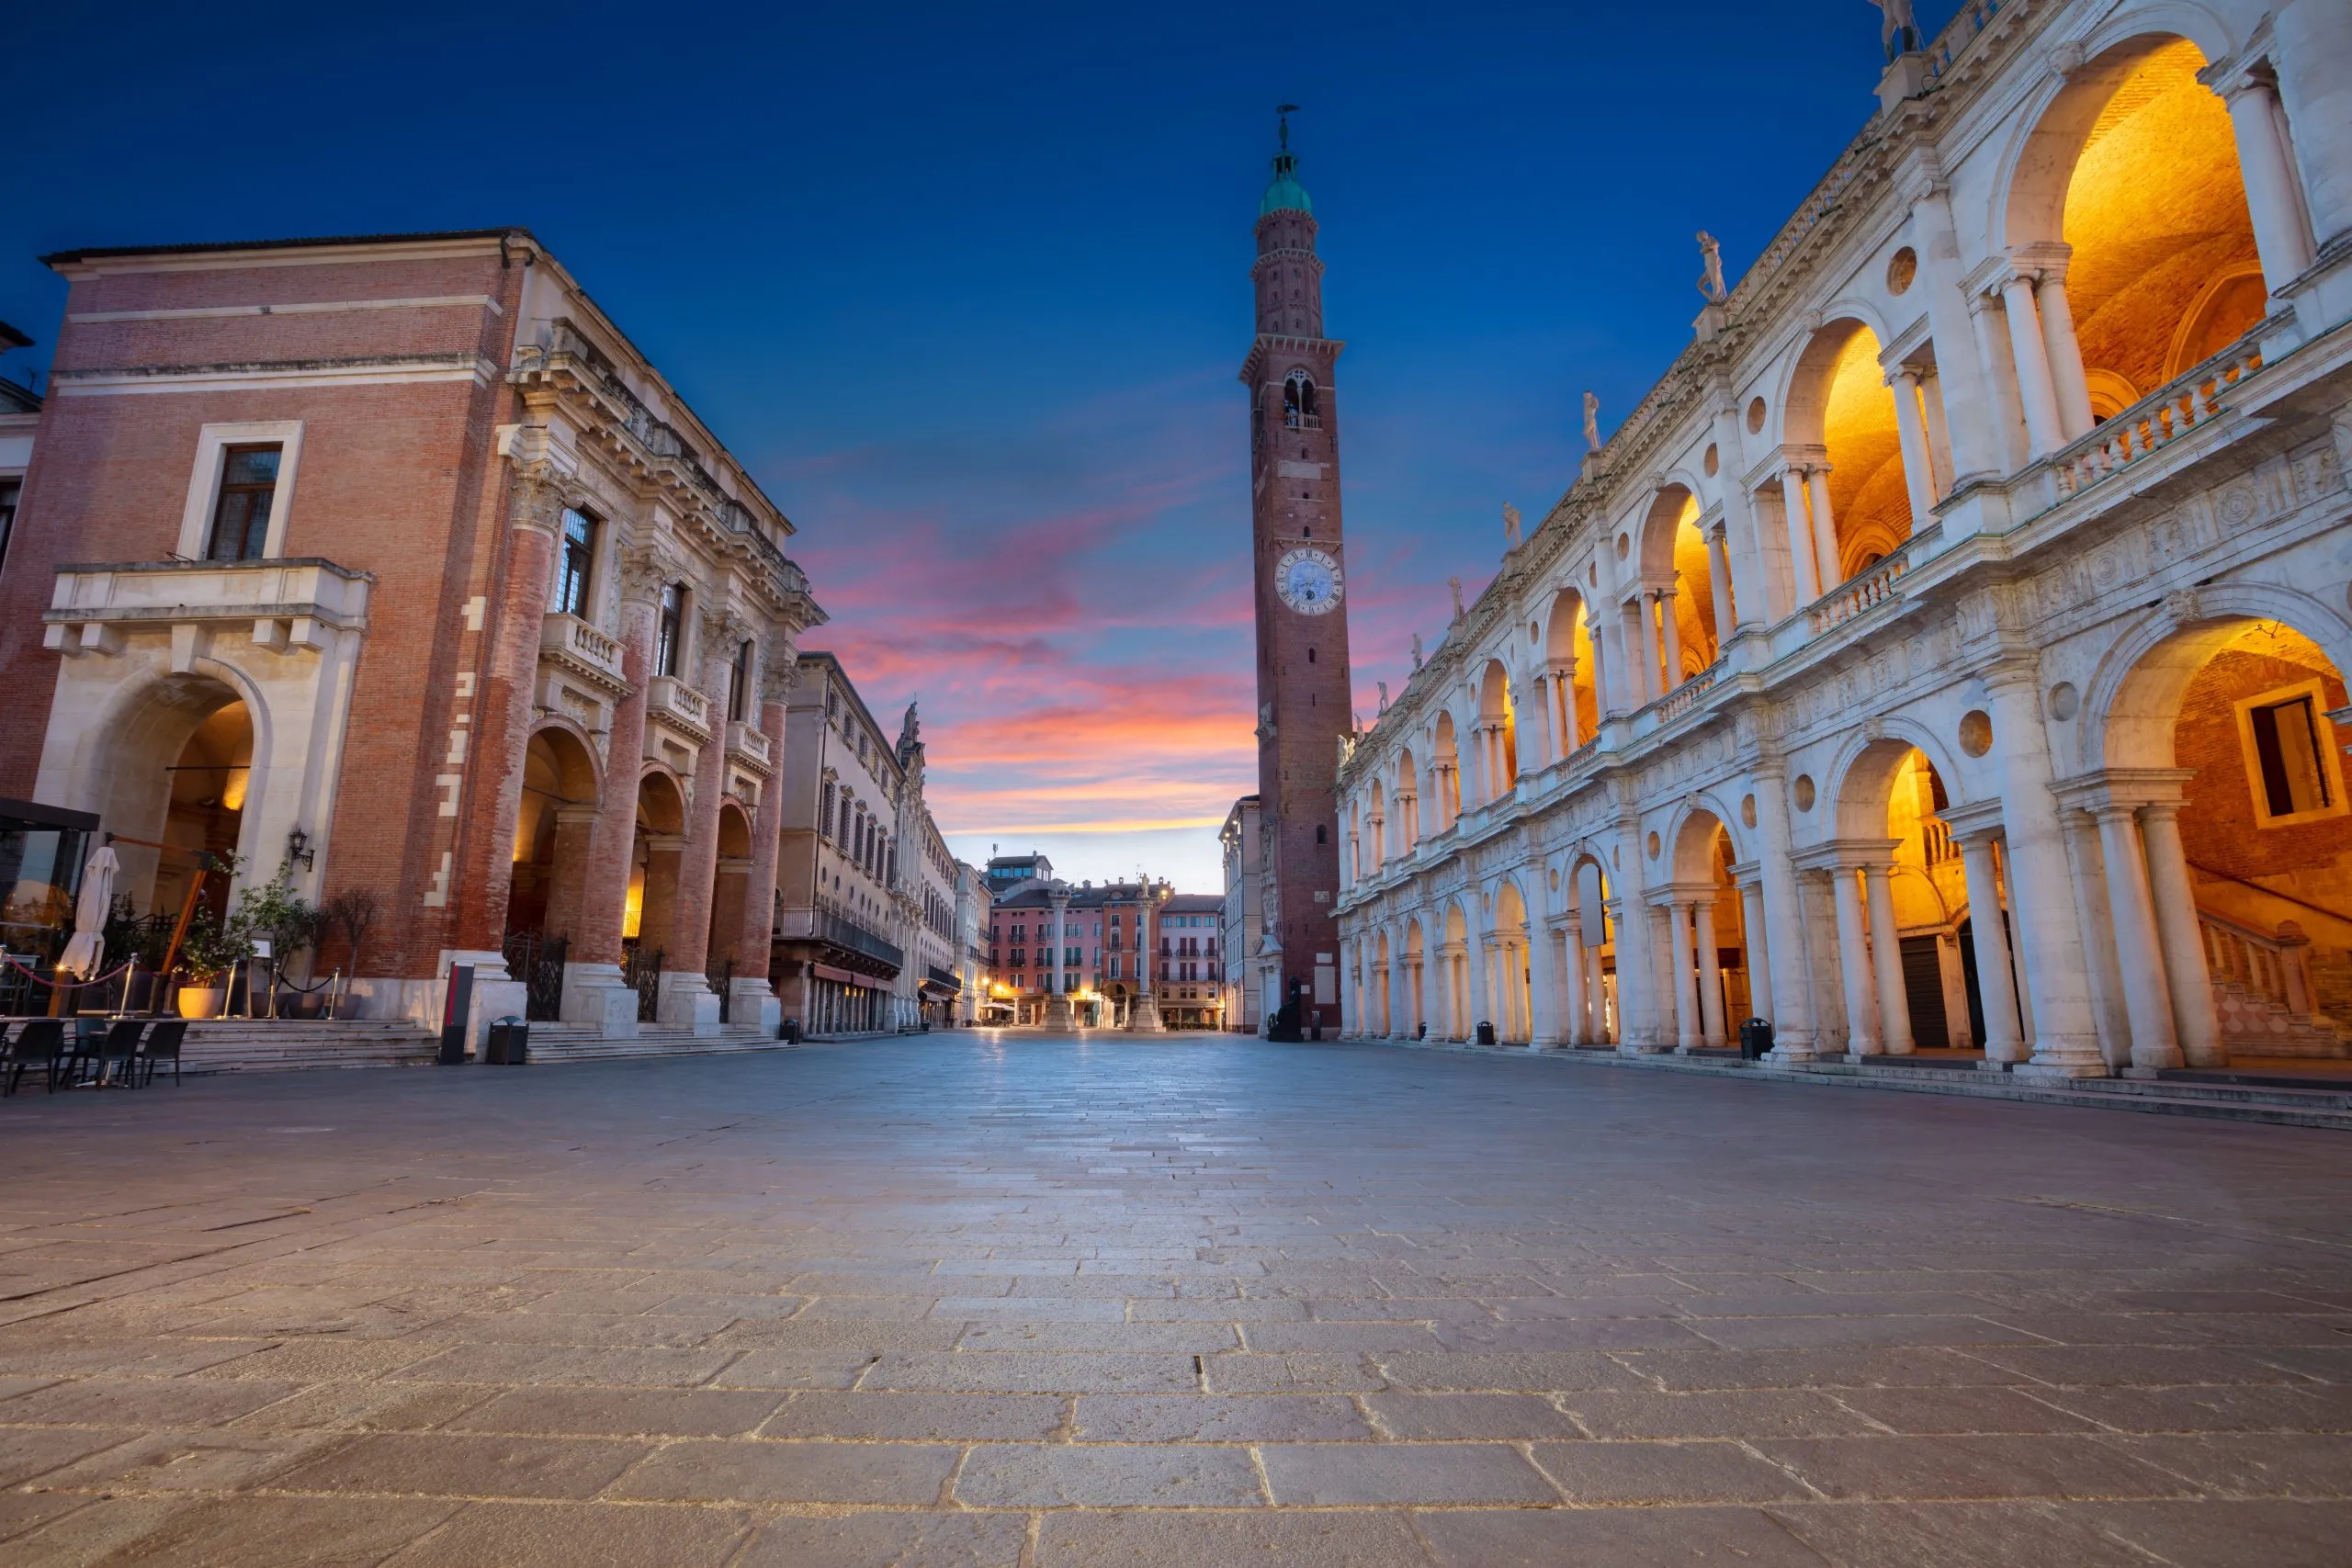 Vicenza, Italy. Cityscape image of historical centre of Vicenza, Italy with old square ( Piazza dei Signori) at sunrise.